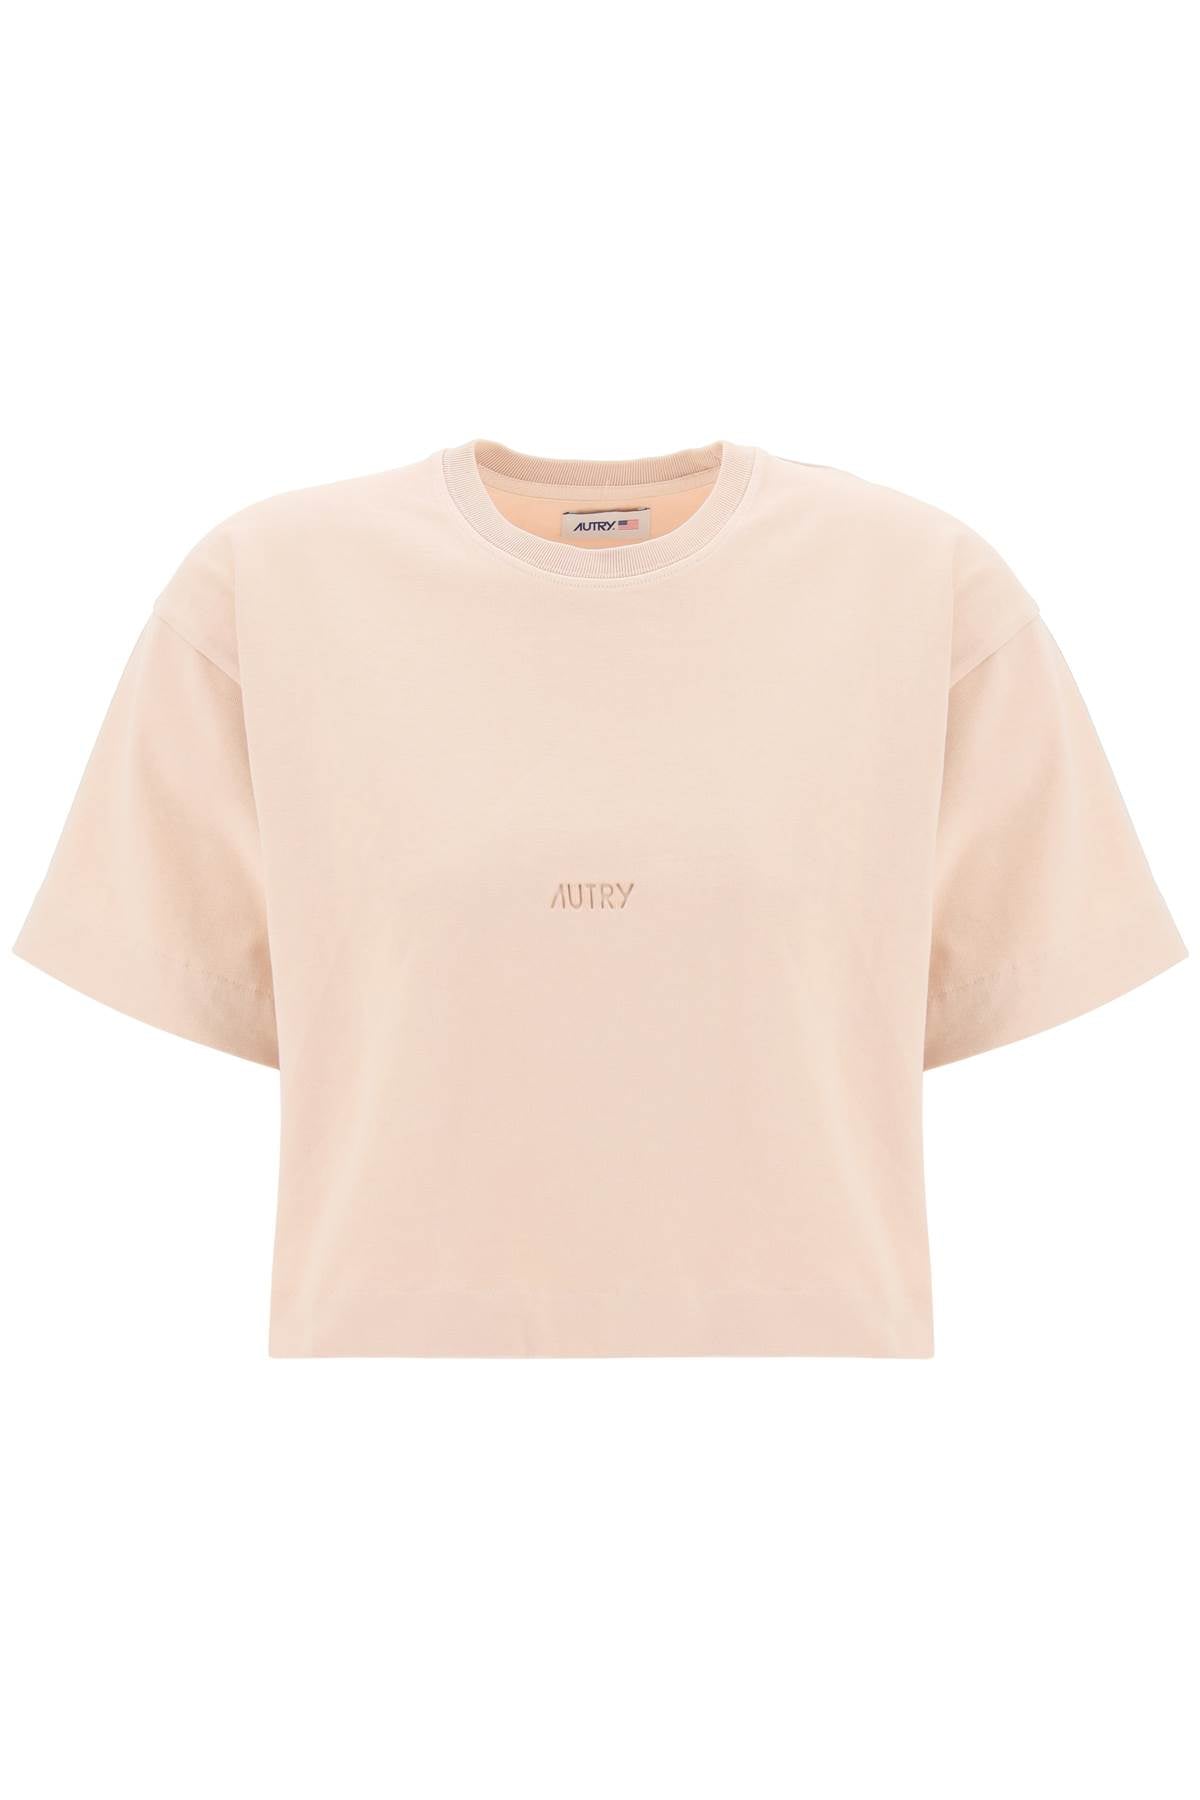 Autry boxy t-shirt with debossed logo-Autry-Urbanheer